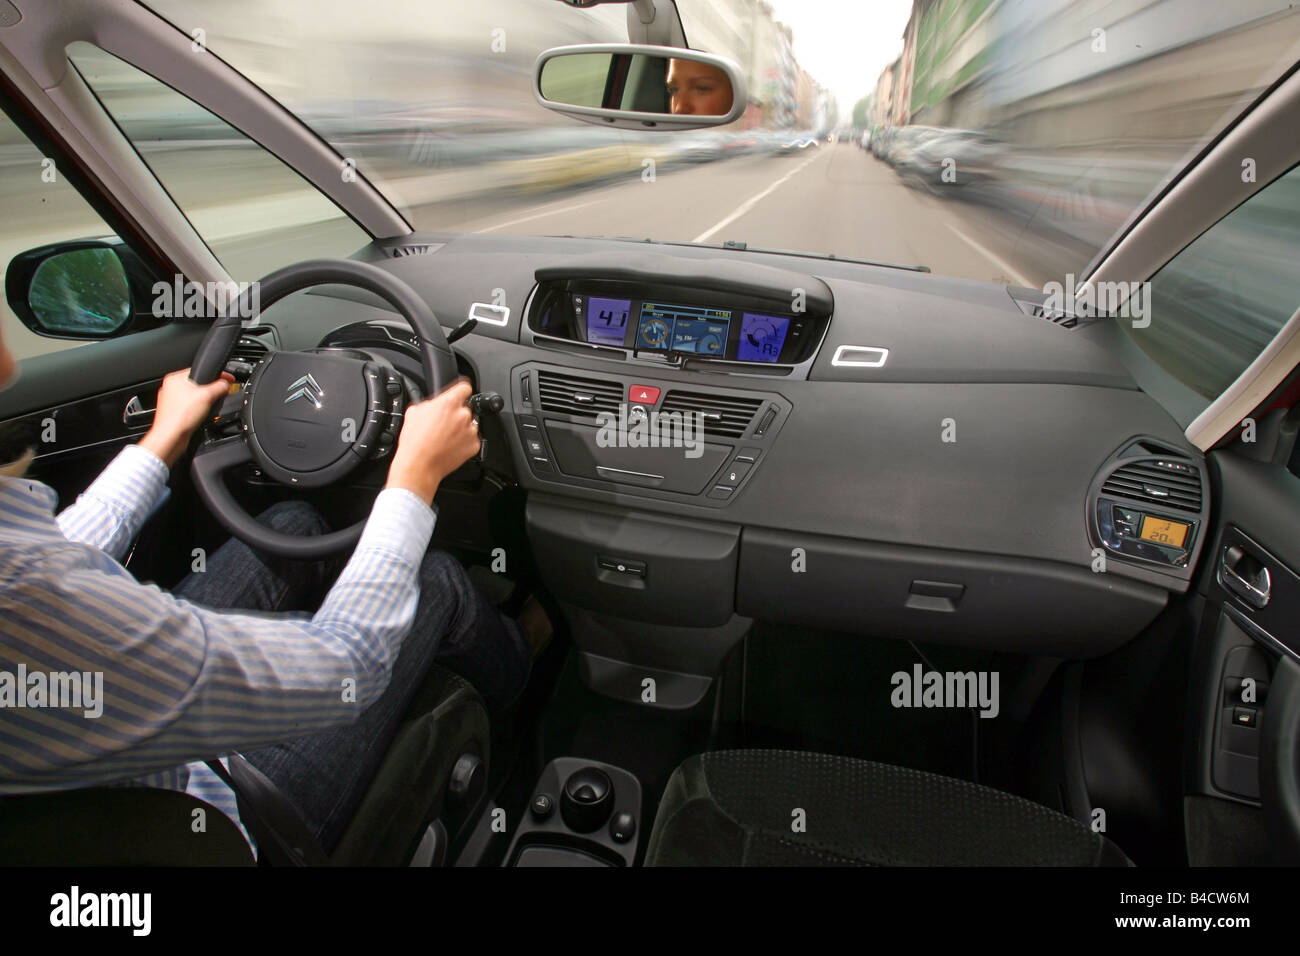 Citroen C4 Piapprox.so HDi 135 Exclusive, model year 2006-, ruby colored,  driving, interior view, view out of the car, view at d Stock Photo - Alamy